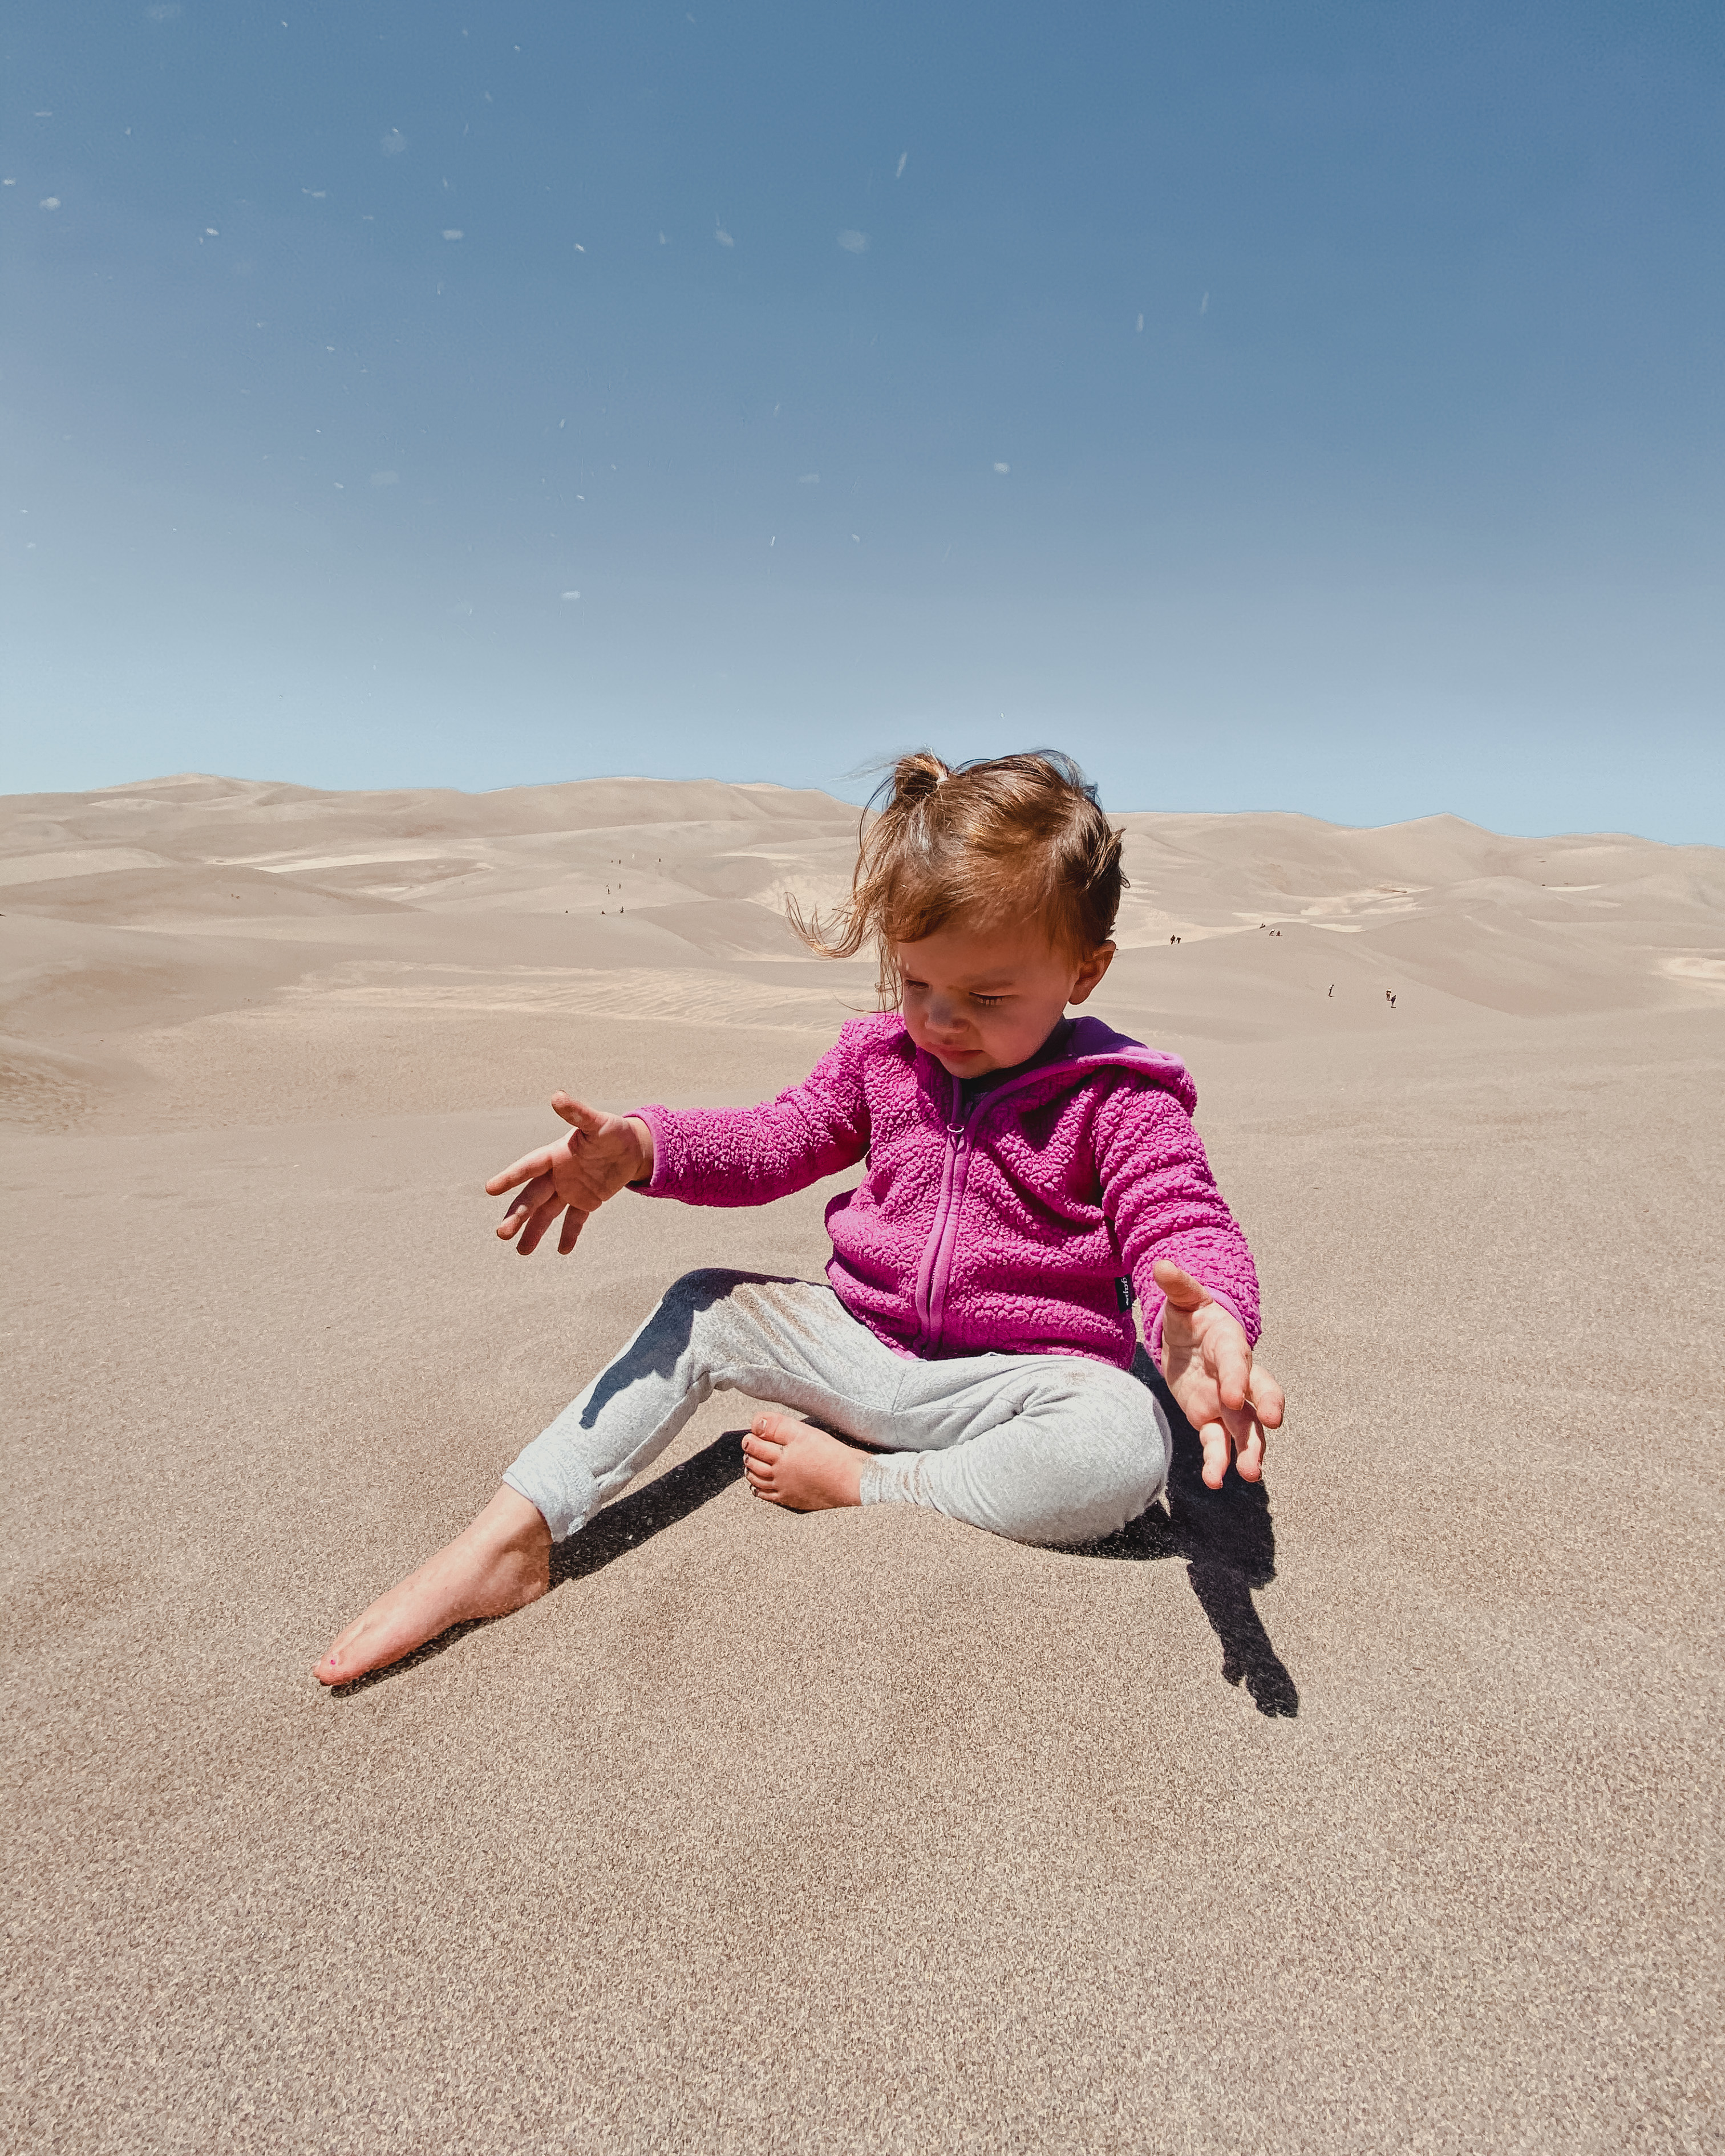 Playing in the sand in Great Sand Dunes National Park